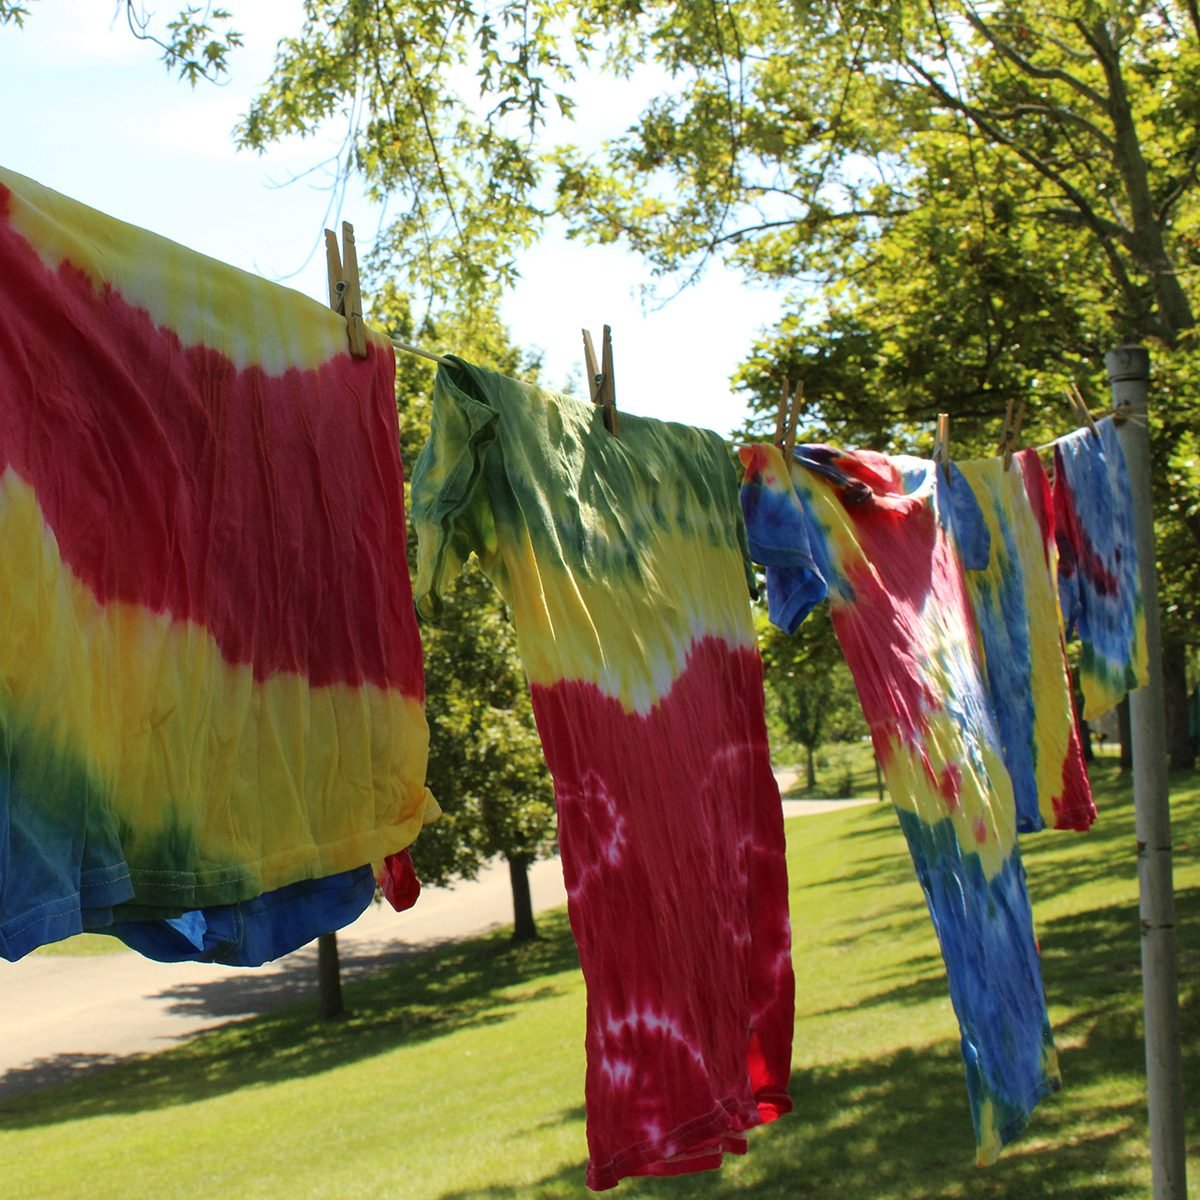 Multi colored tie dye tee shirts hanging on clothesline with trees